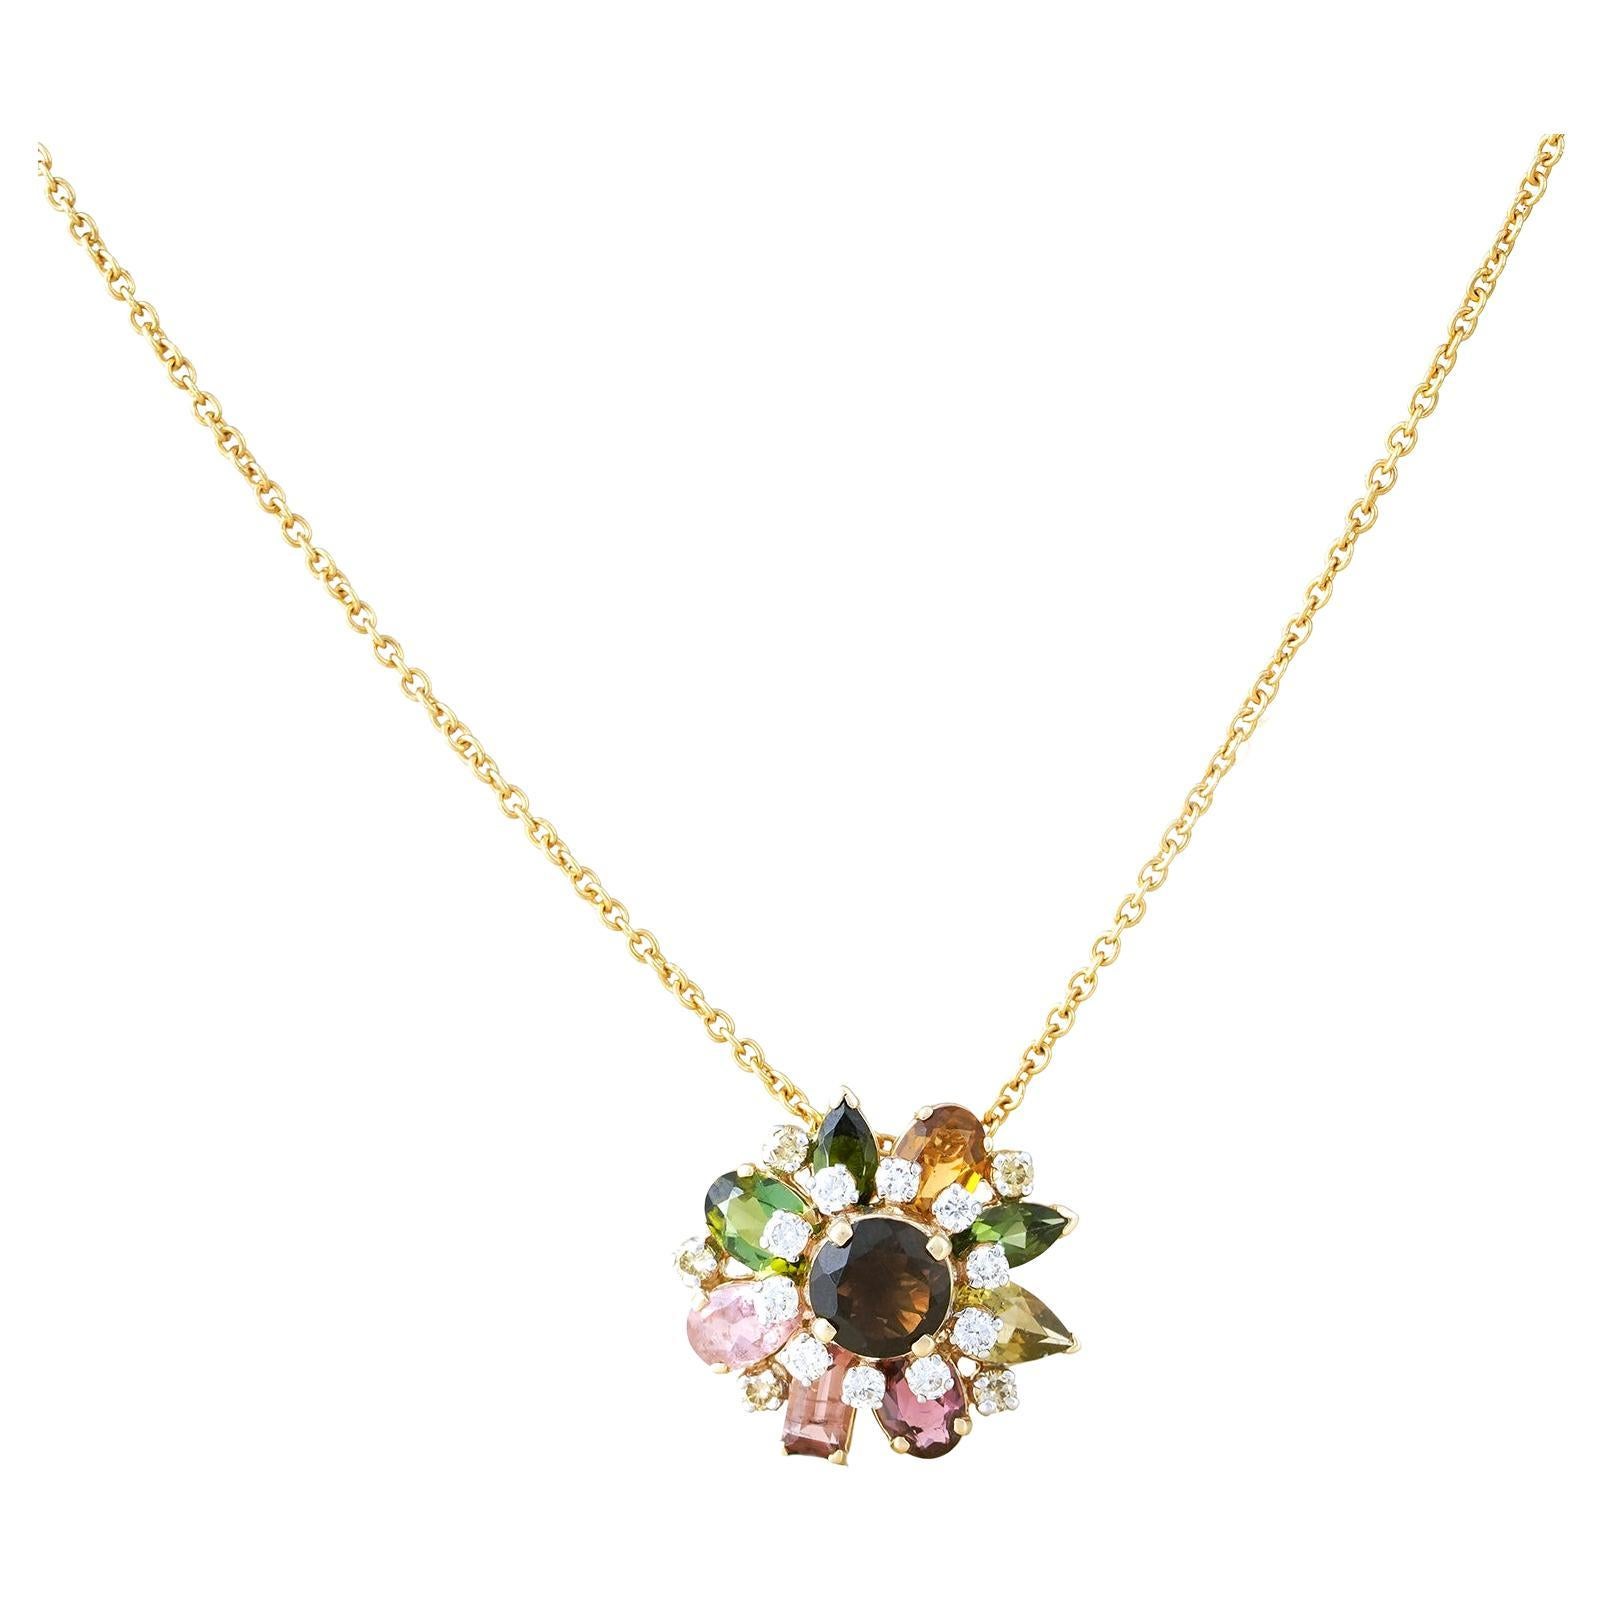 Moi Autumn Gold Diamond and Gemstones Pendant Necklace For Sale